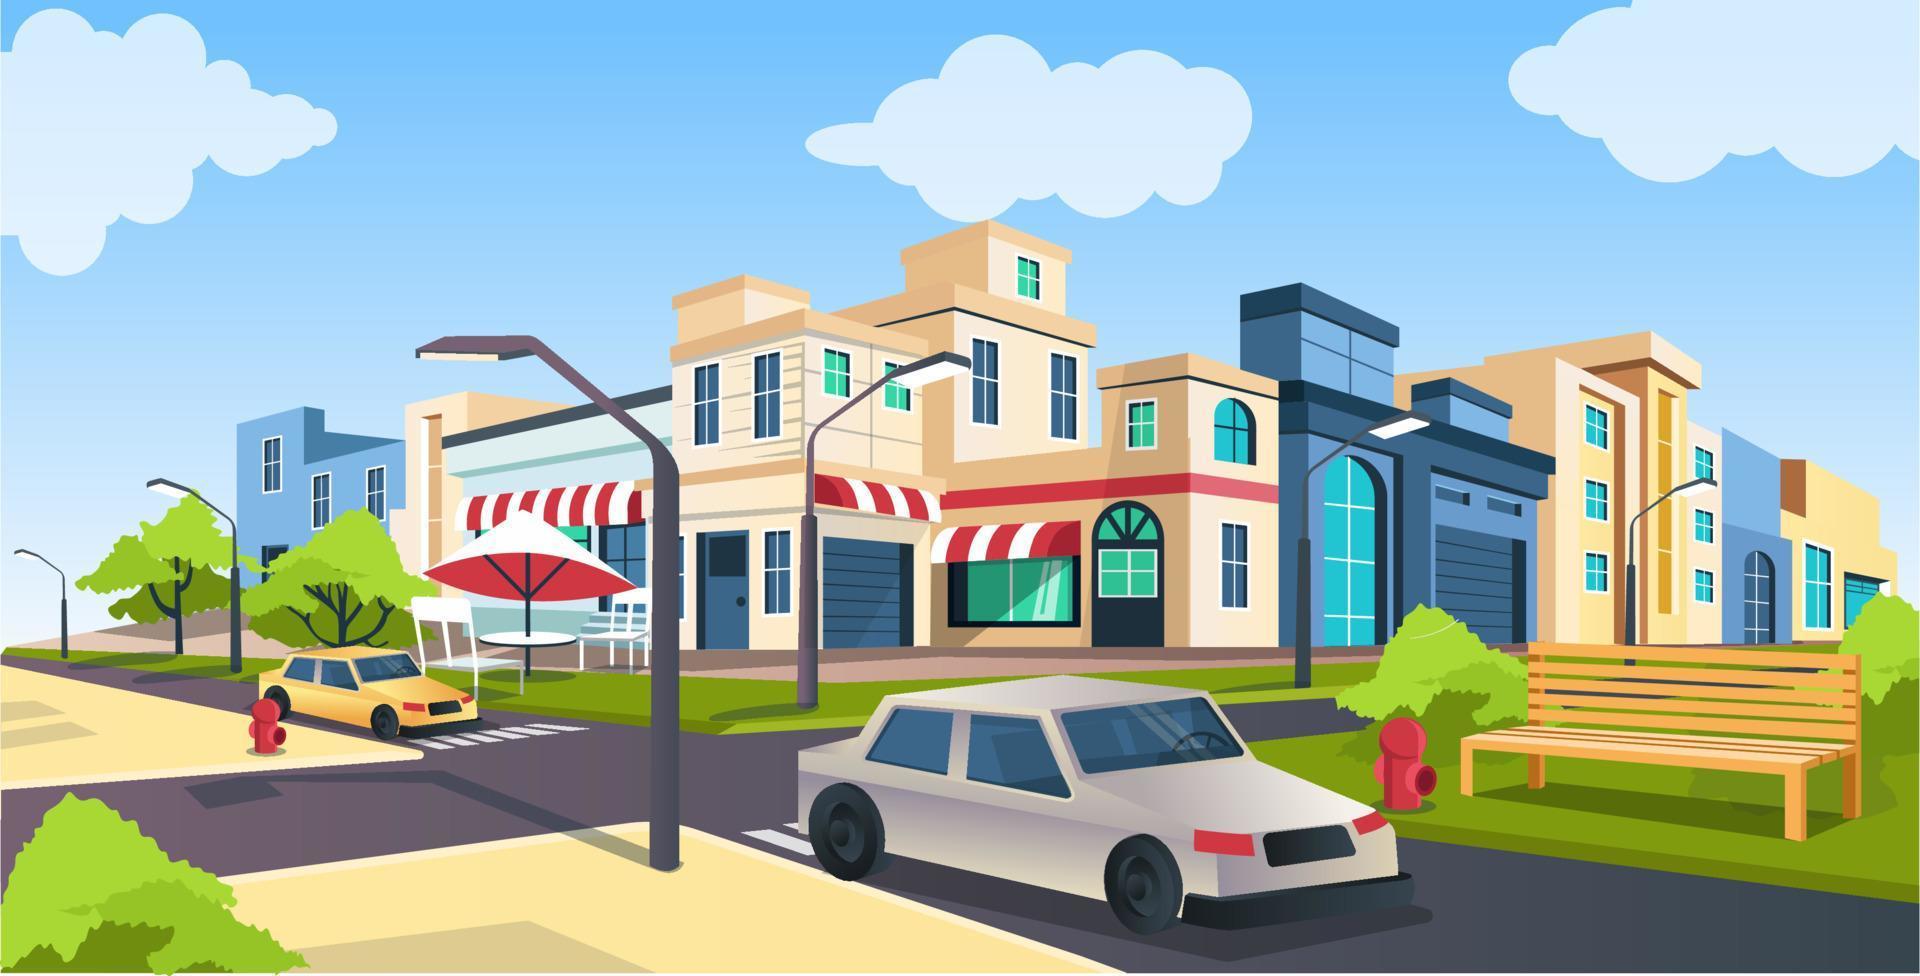 Flat isometric vector illustration, road and car, city street with Park bench landscape